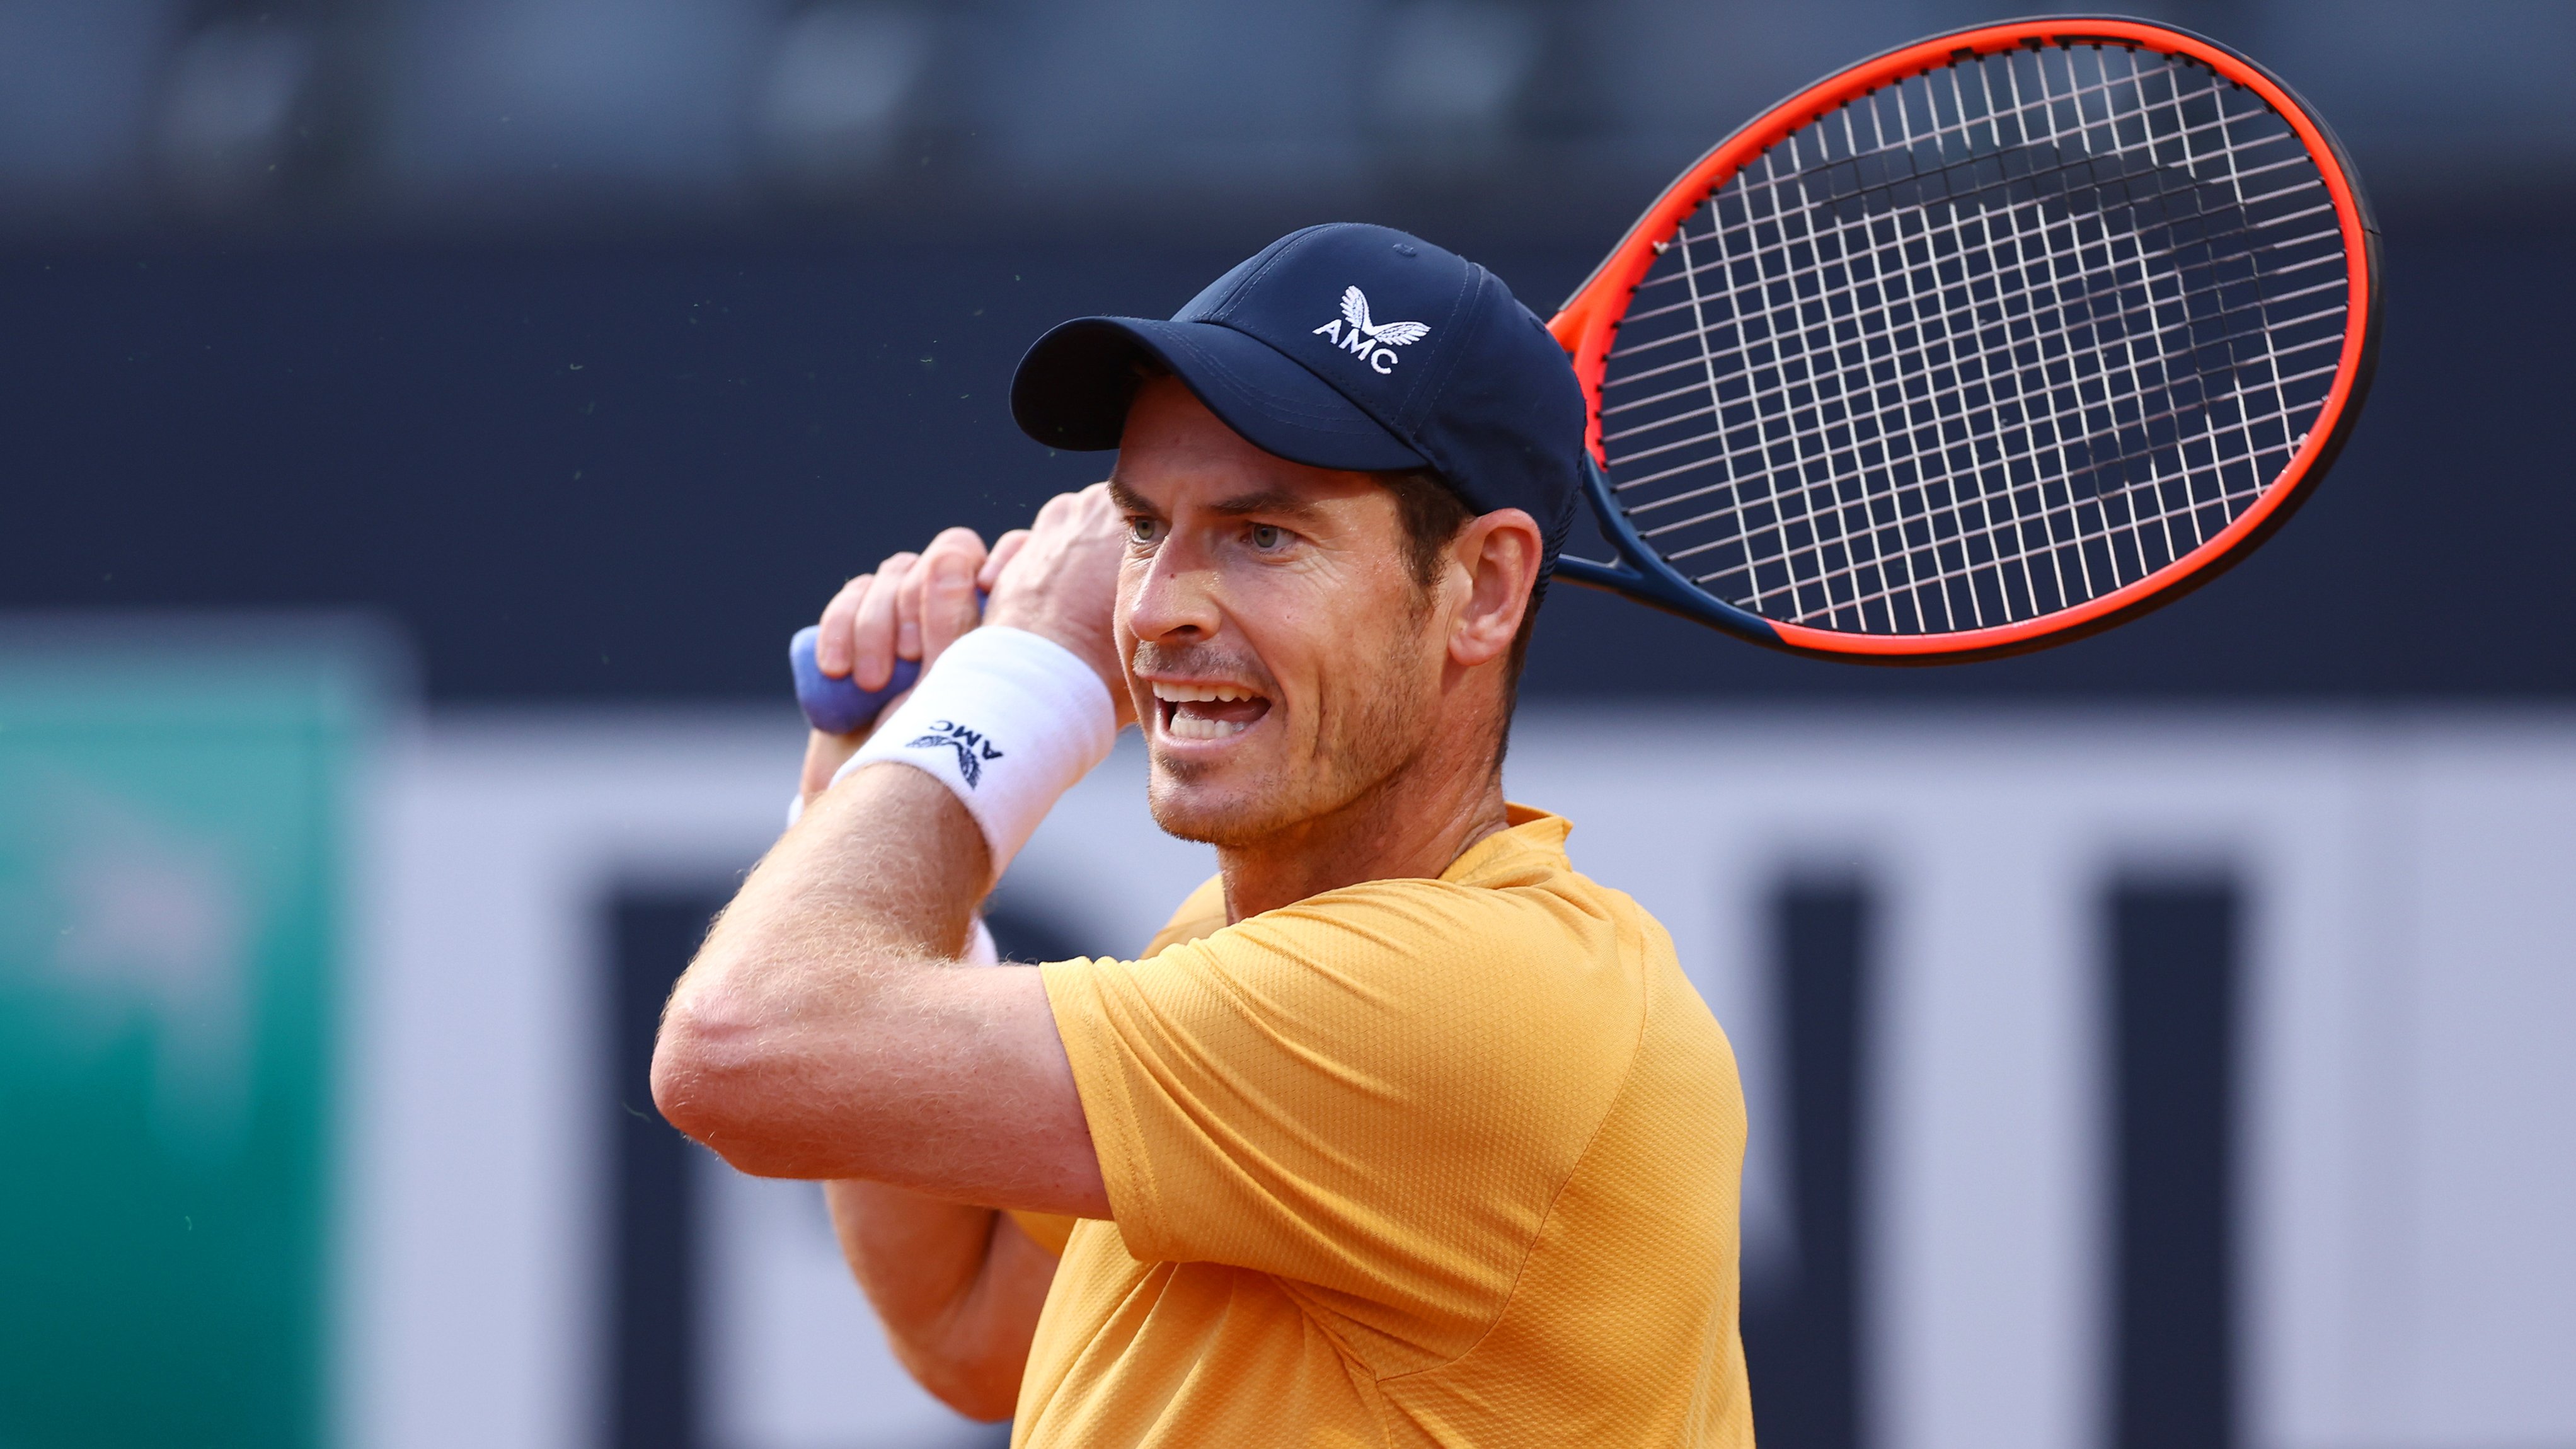 3-Time Grand Slam Champion Andy Murray Withdraws From French Open